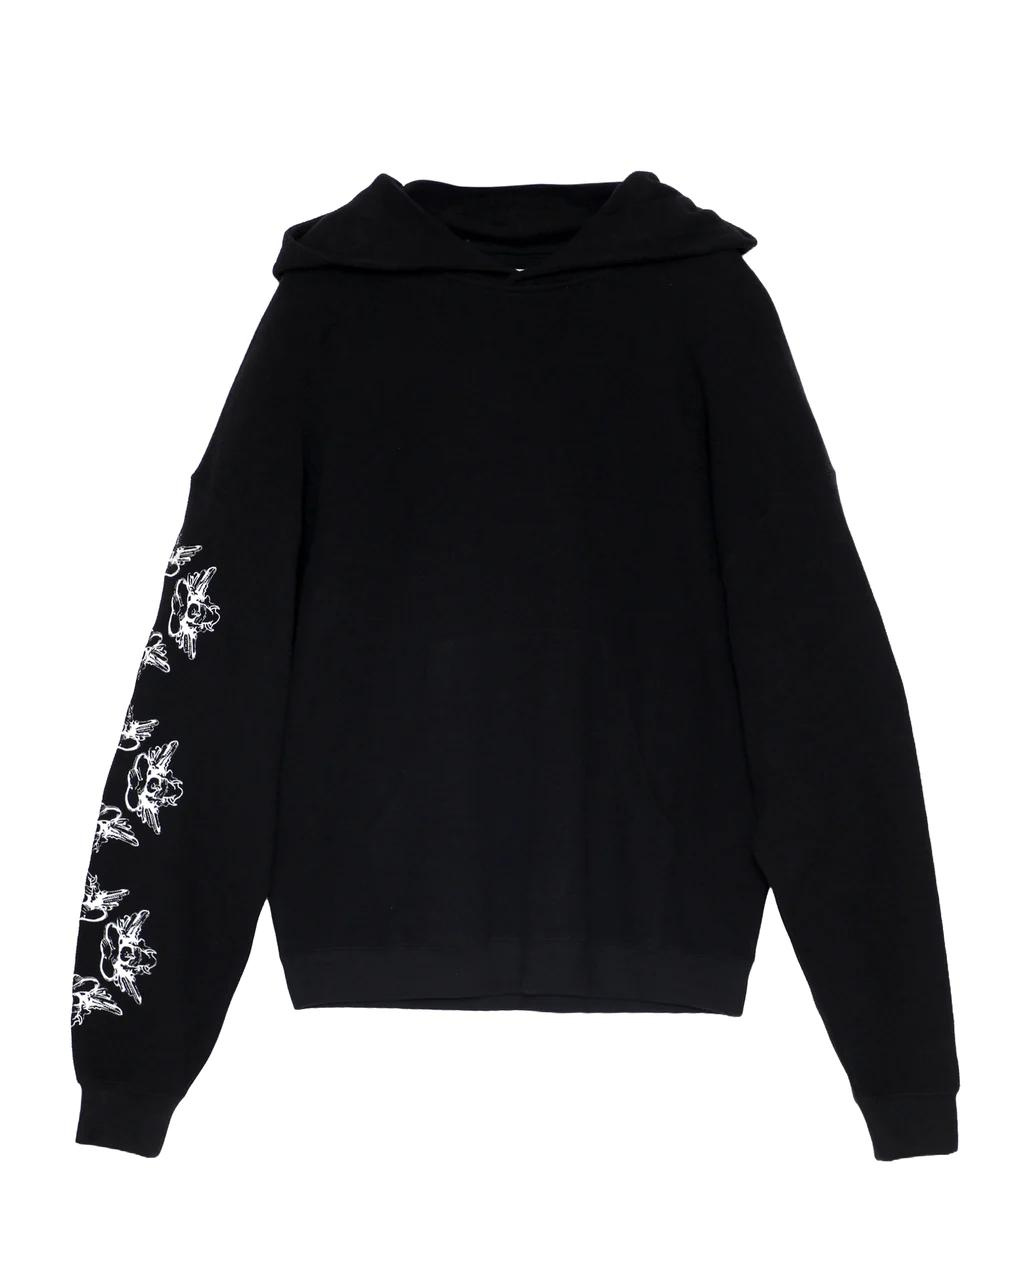 Up In Smoke Hoodie Black, Sweat Lounge by Boys Lie | LIT Boutique